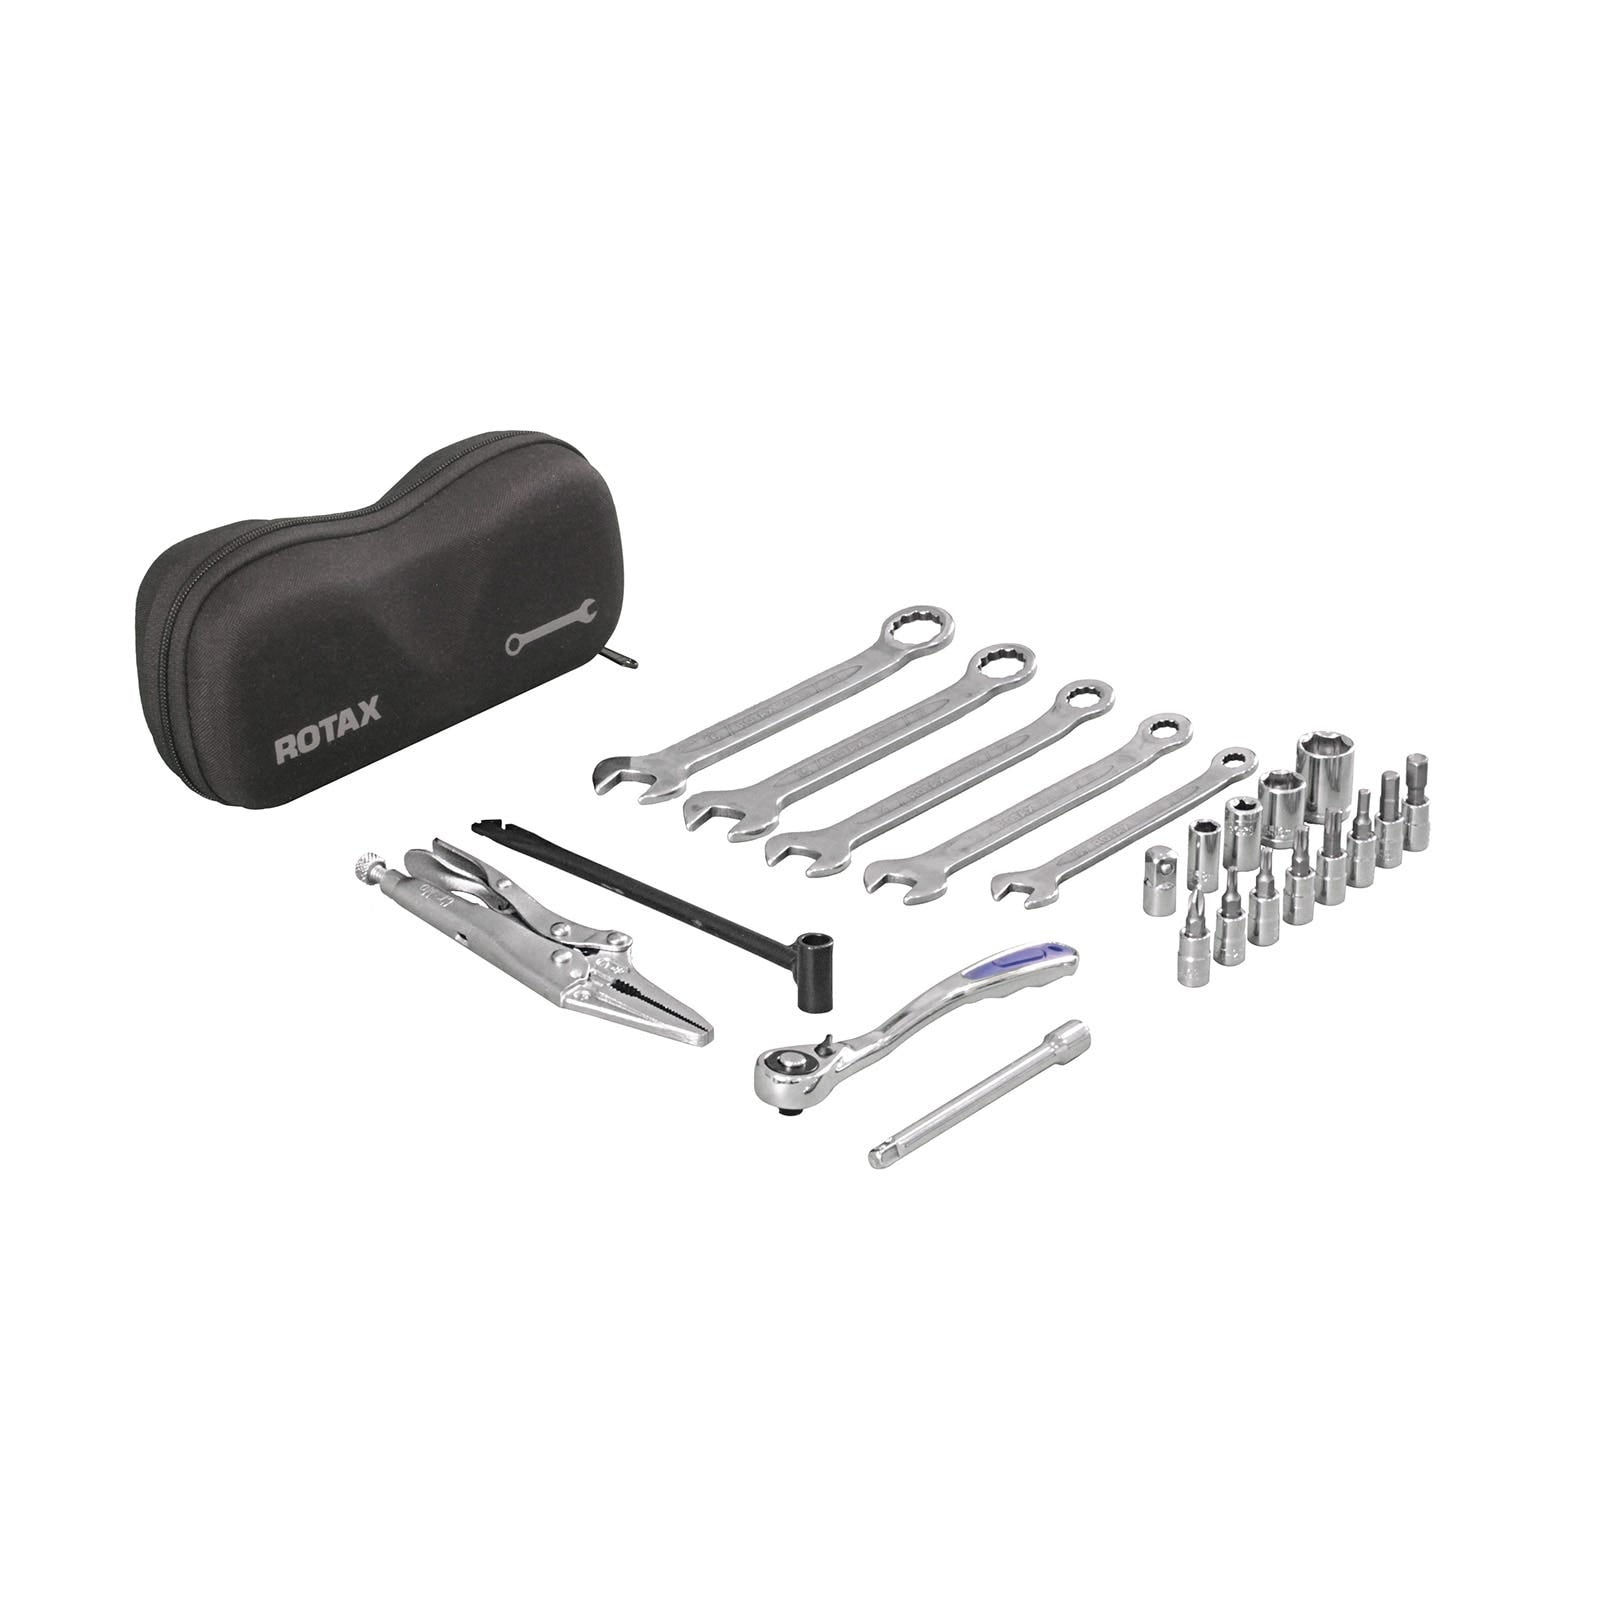 Deluxe Tool Kit - 860202029 - The Parts Lodge